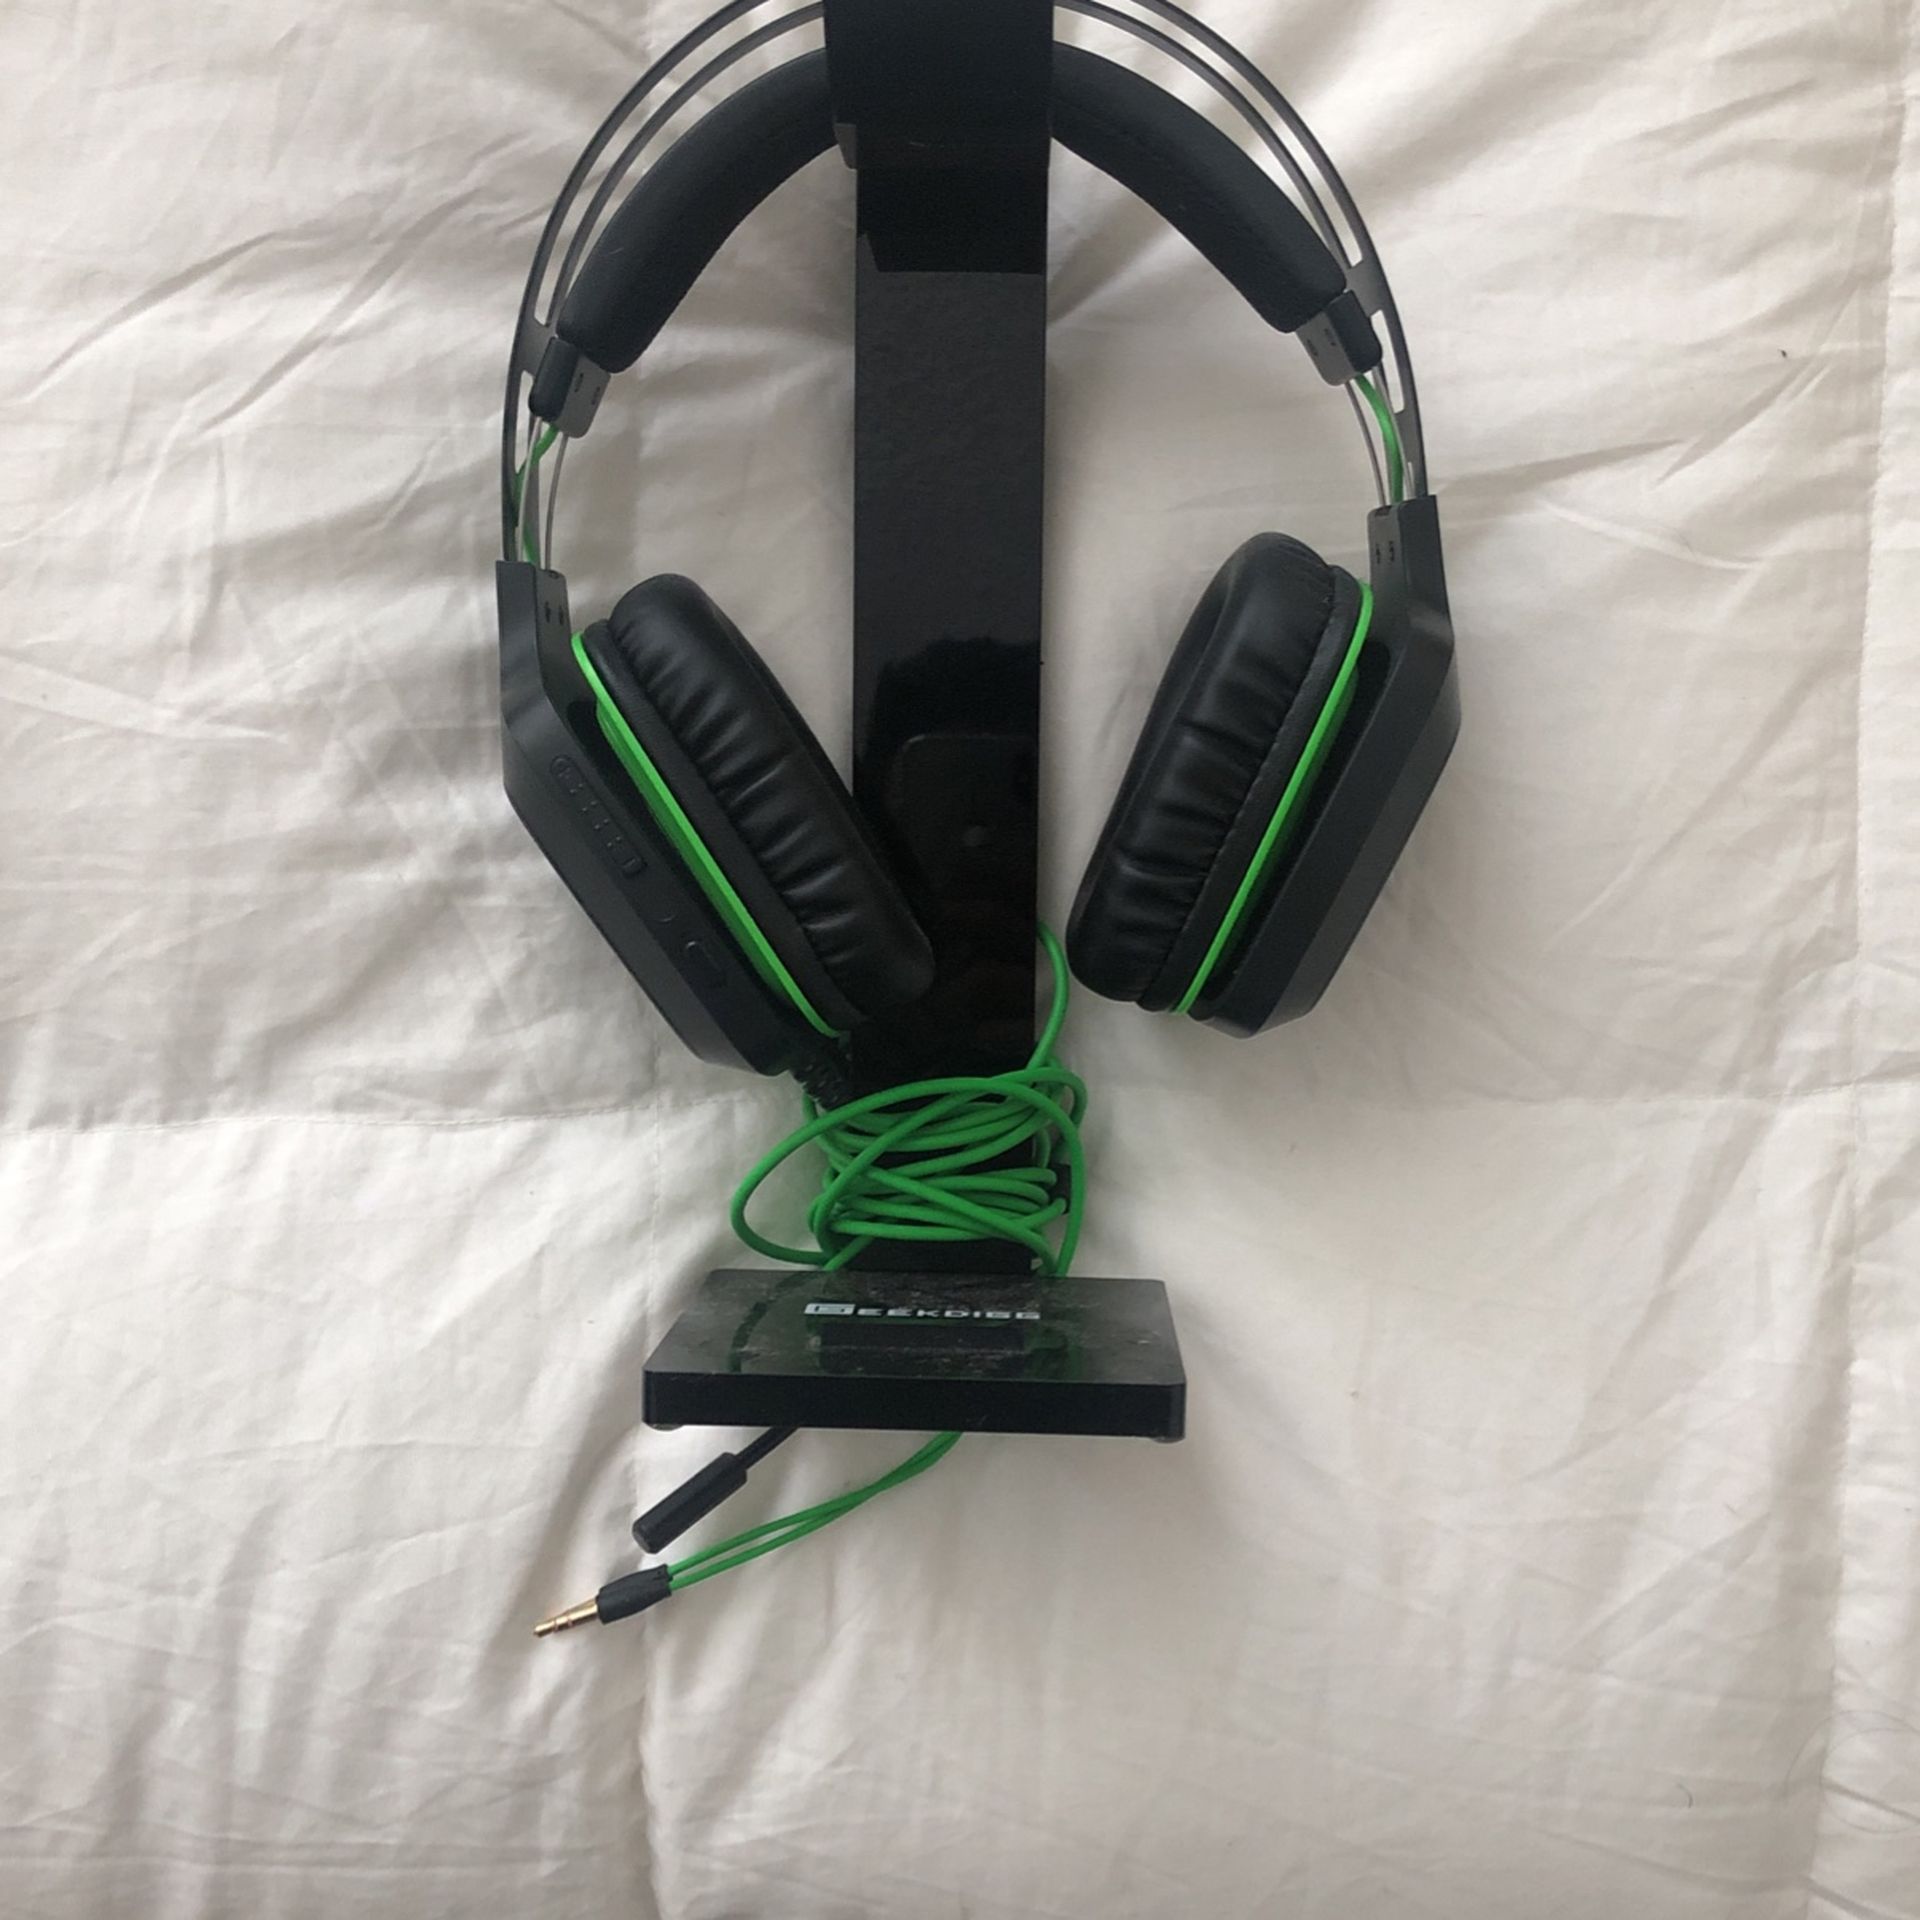 Wired gaming headset and stand